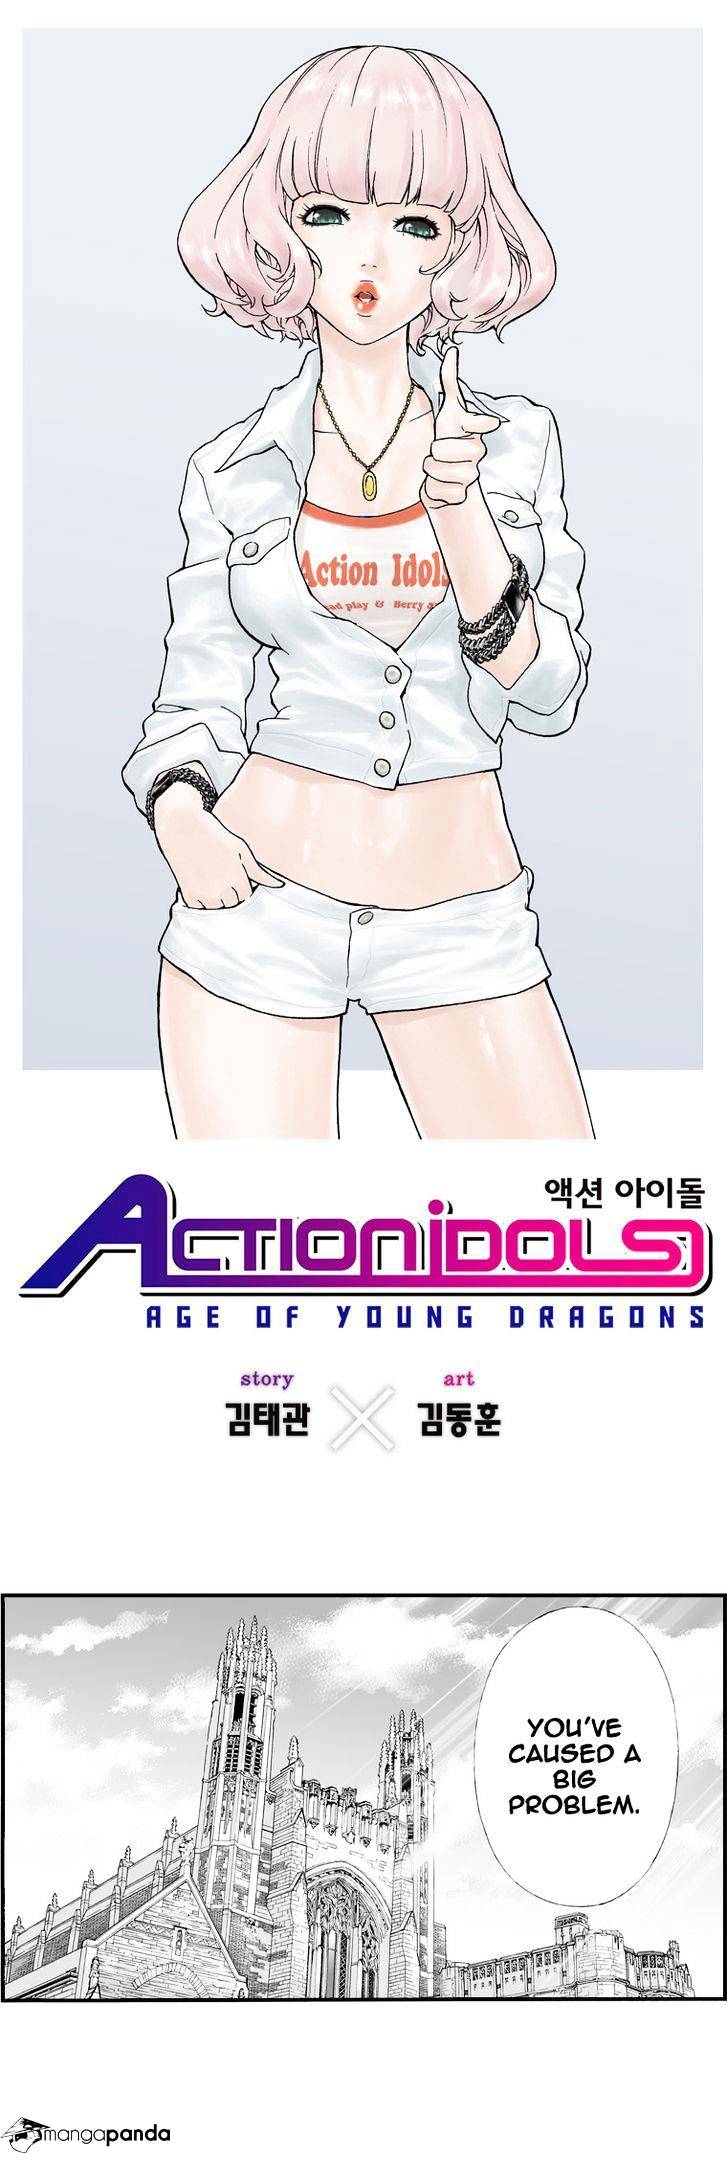 Action Idols - Age Of Young Dragons Chapter 5 #1